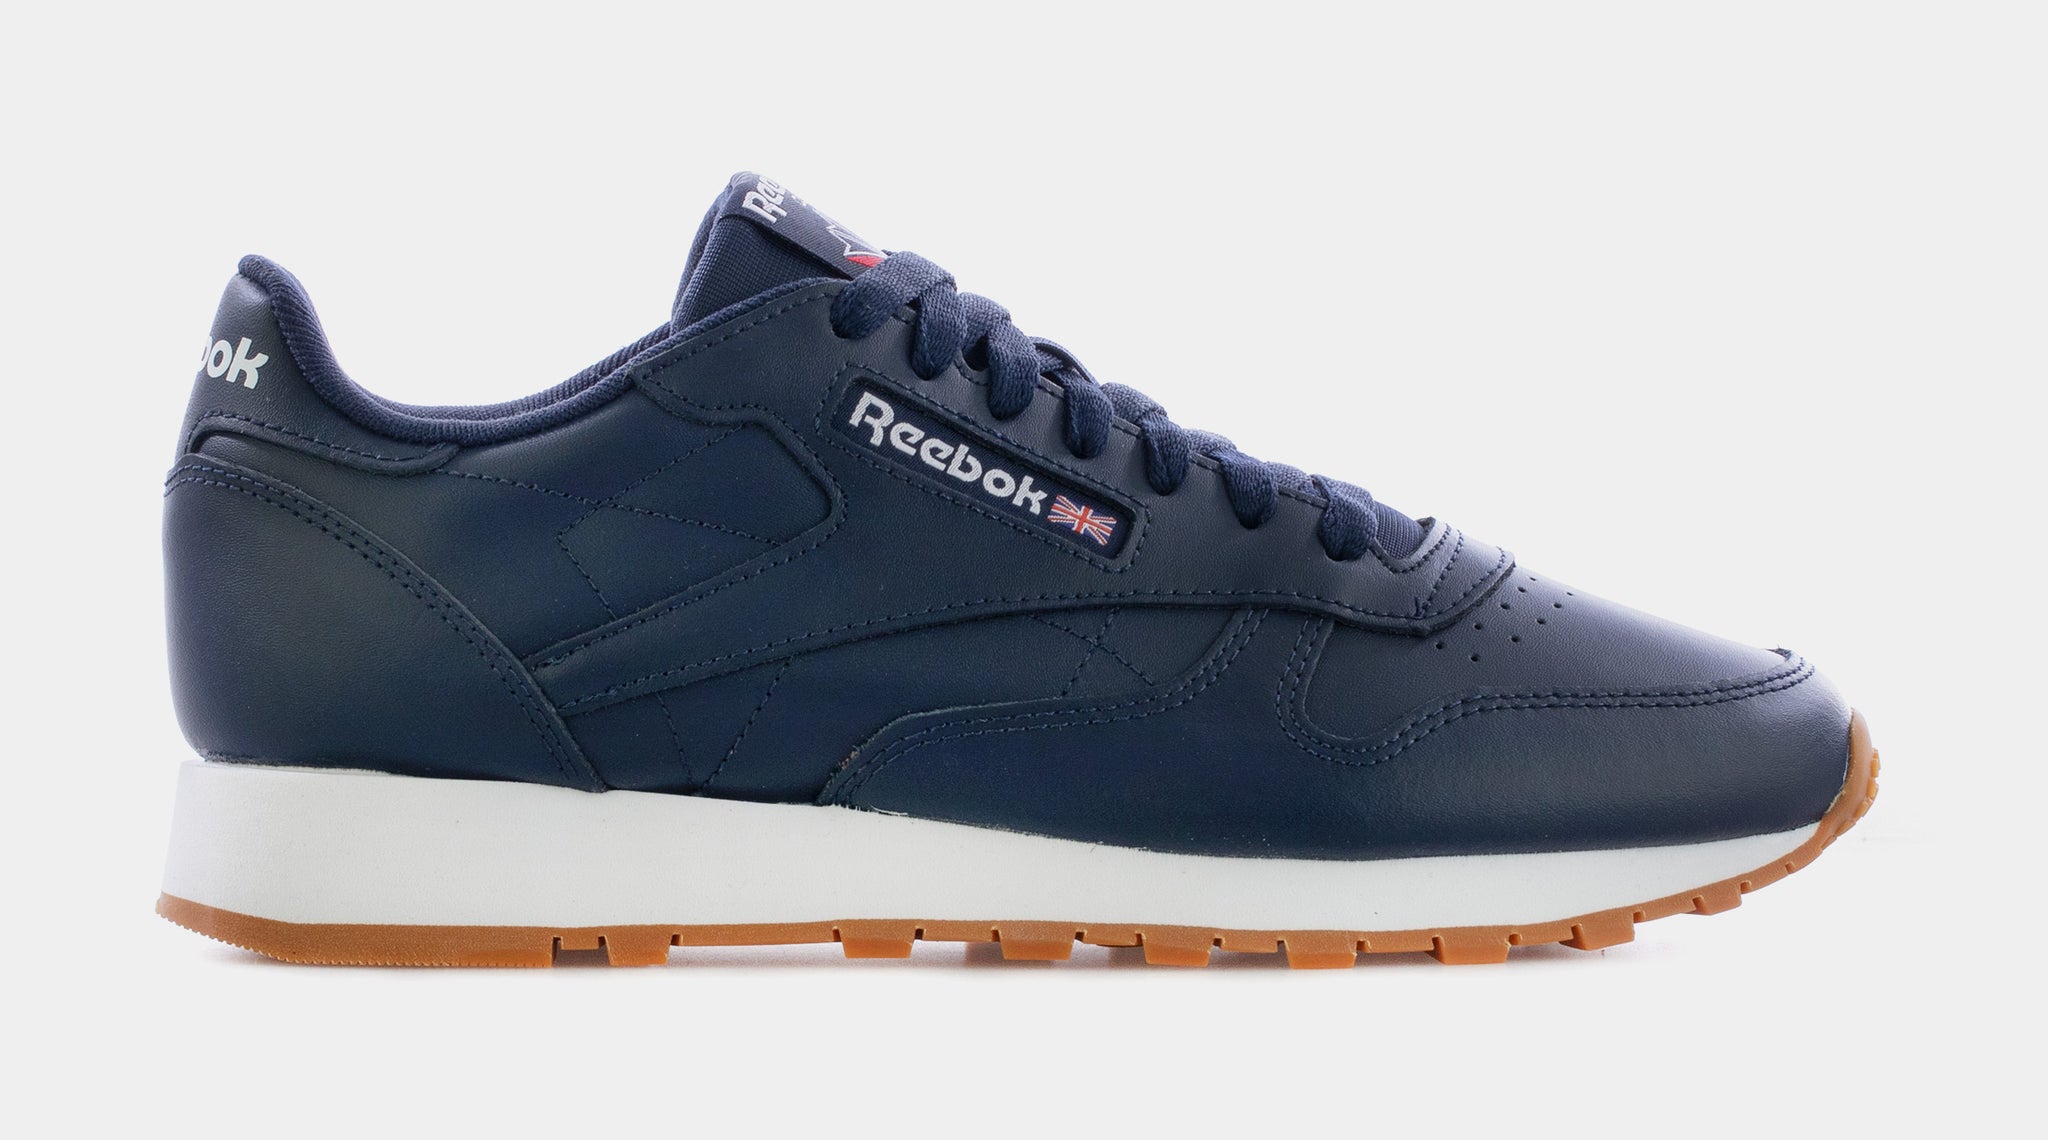 Buy Reebok Mens Classic Leather 1983 Vintage Running Shoes online